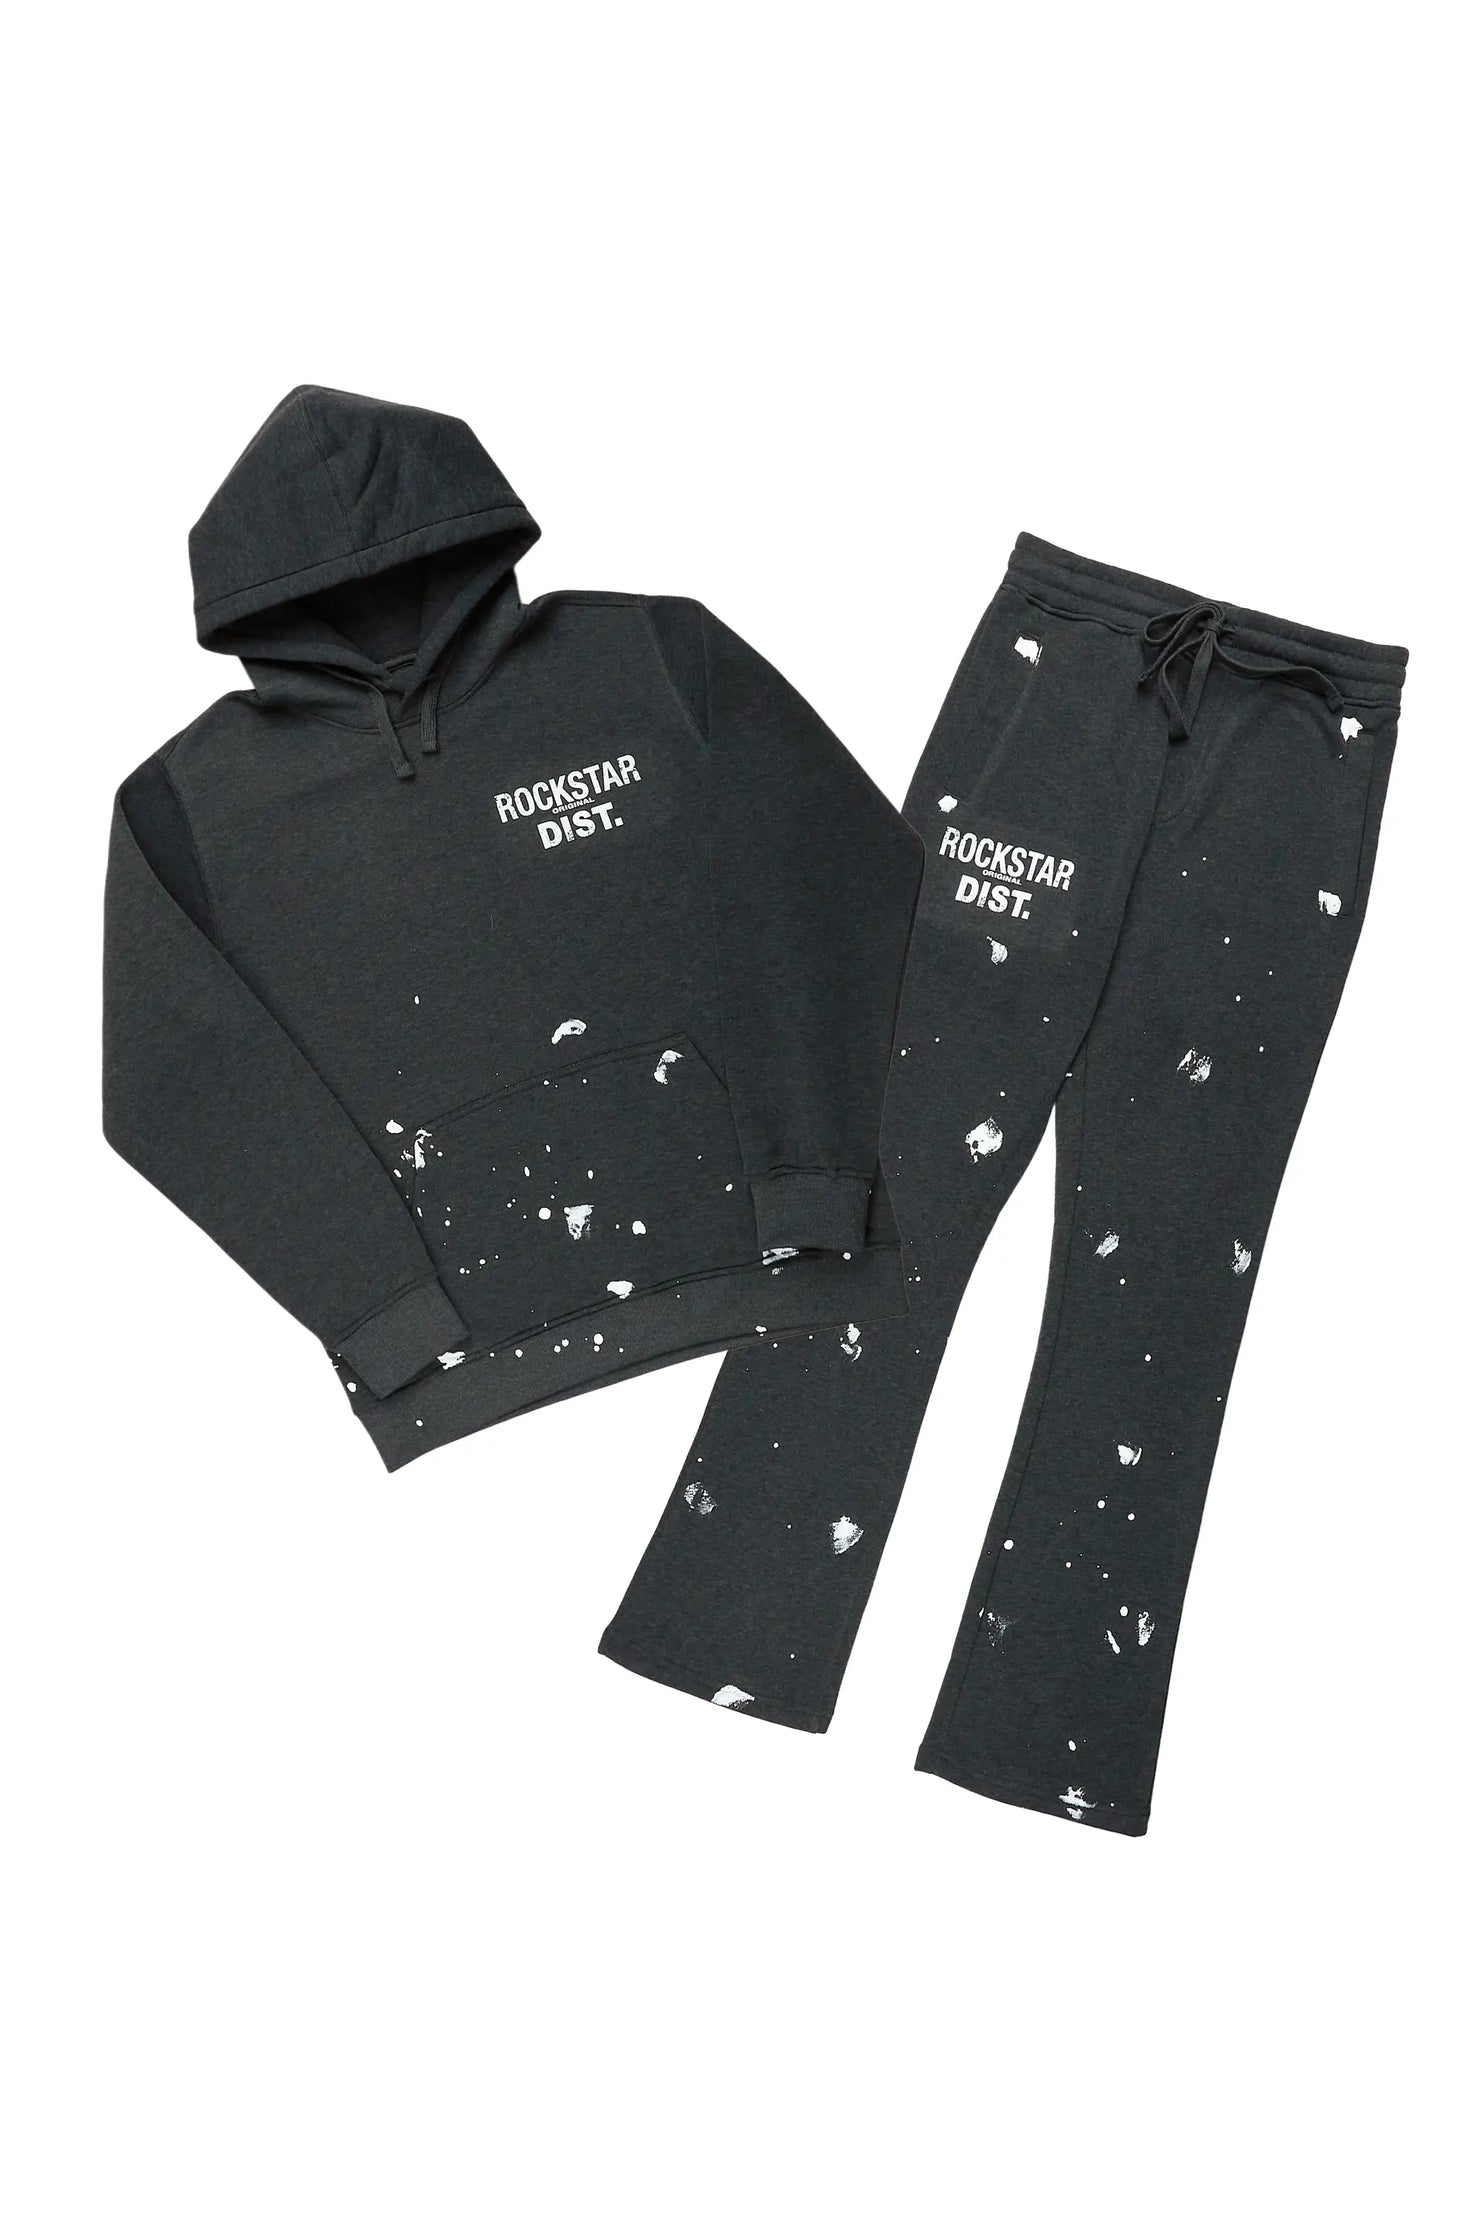 Raffer Charcoal Hoodie/Stacked Flare Pant Set